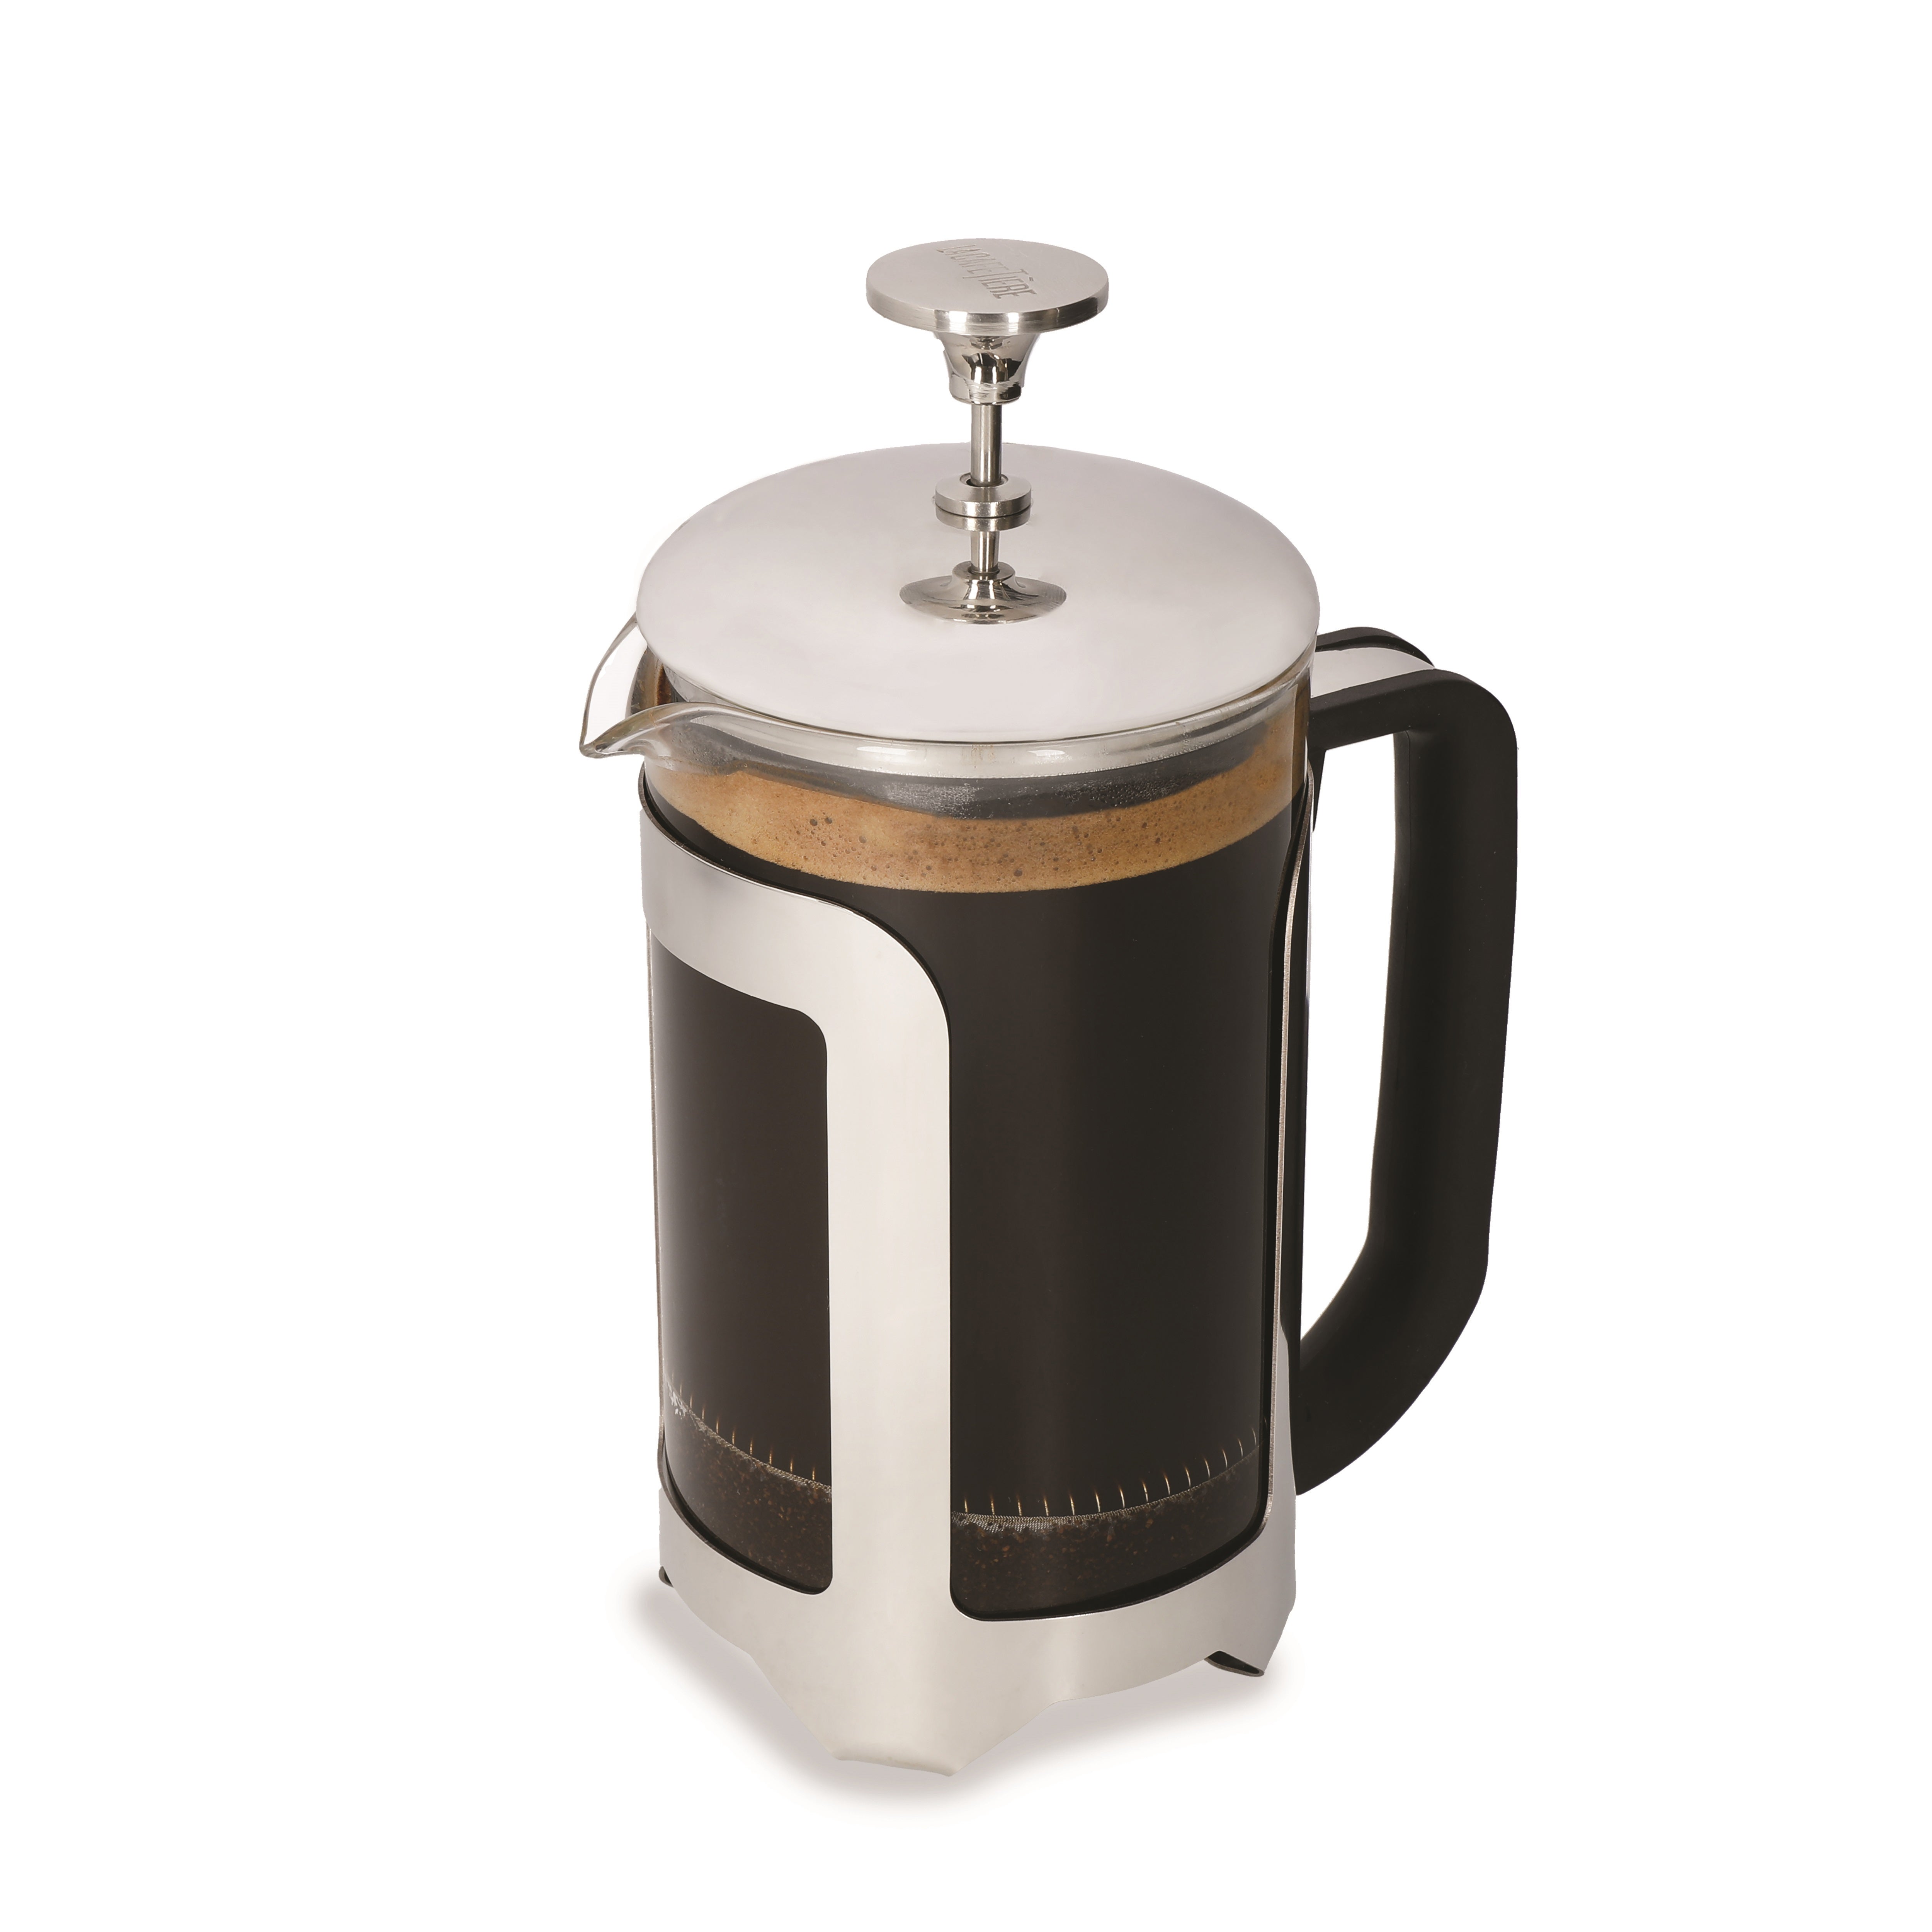 La Cafetiere Roma Stainless Steel 6 Cup Cafetiere